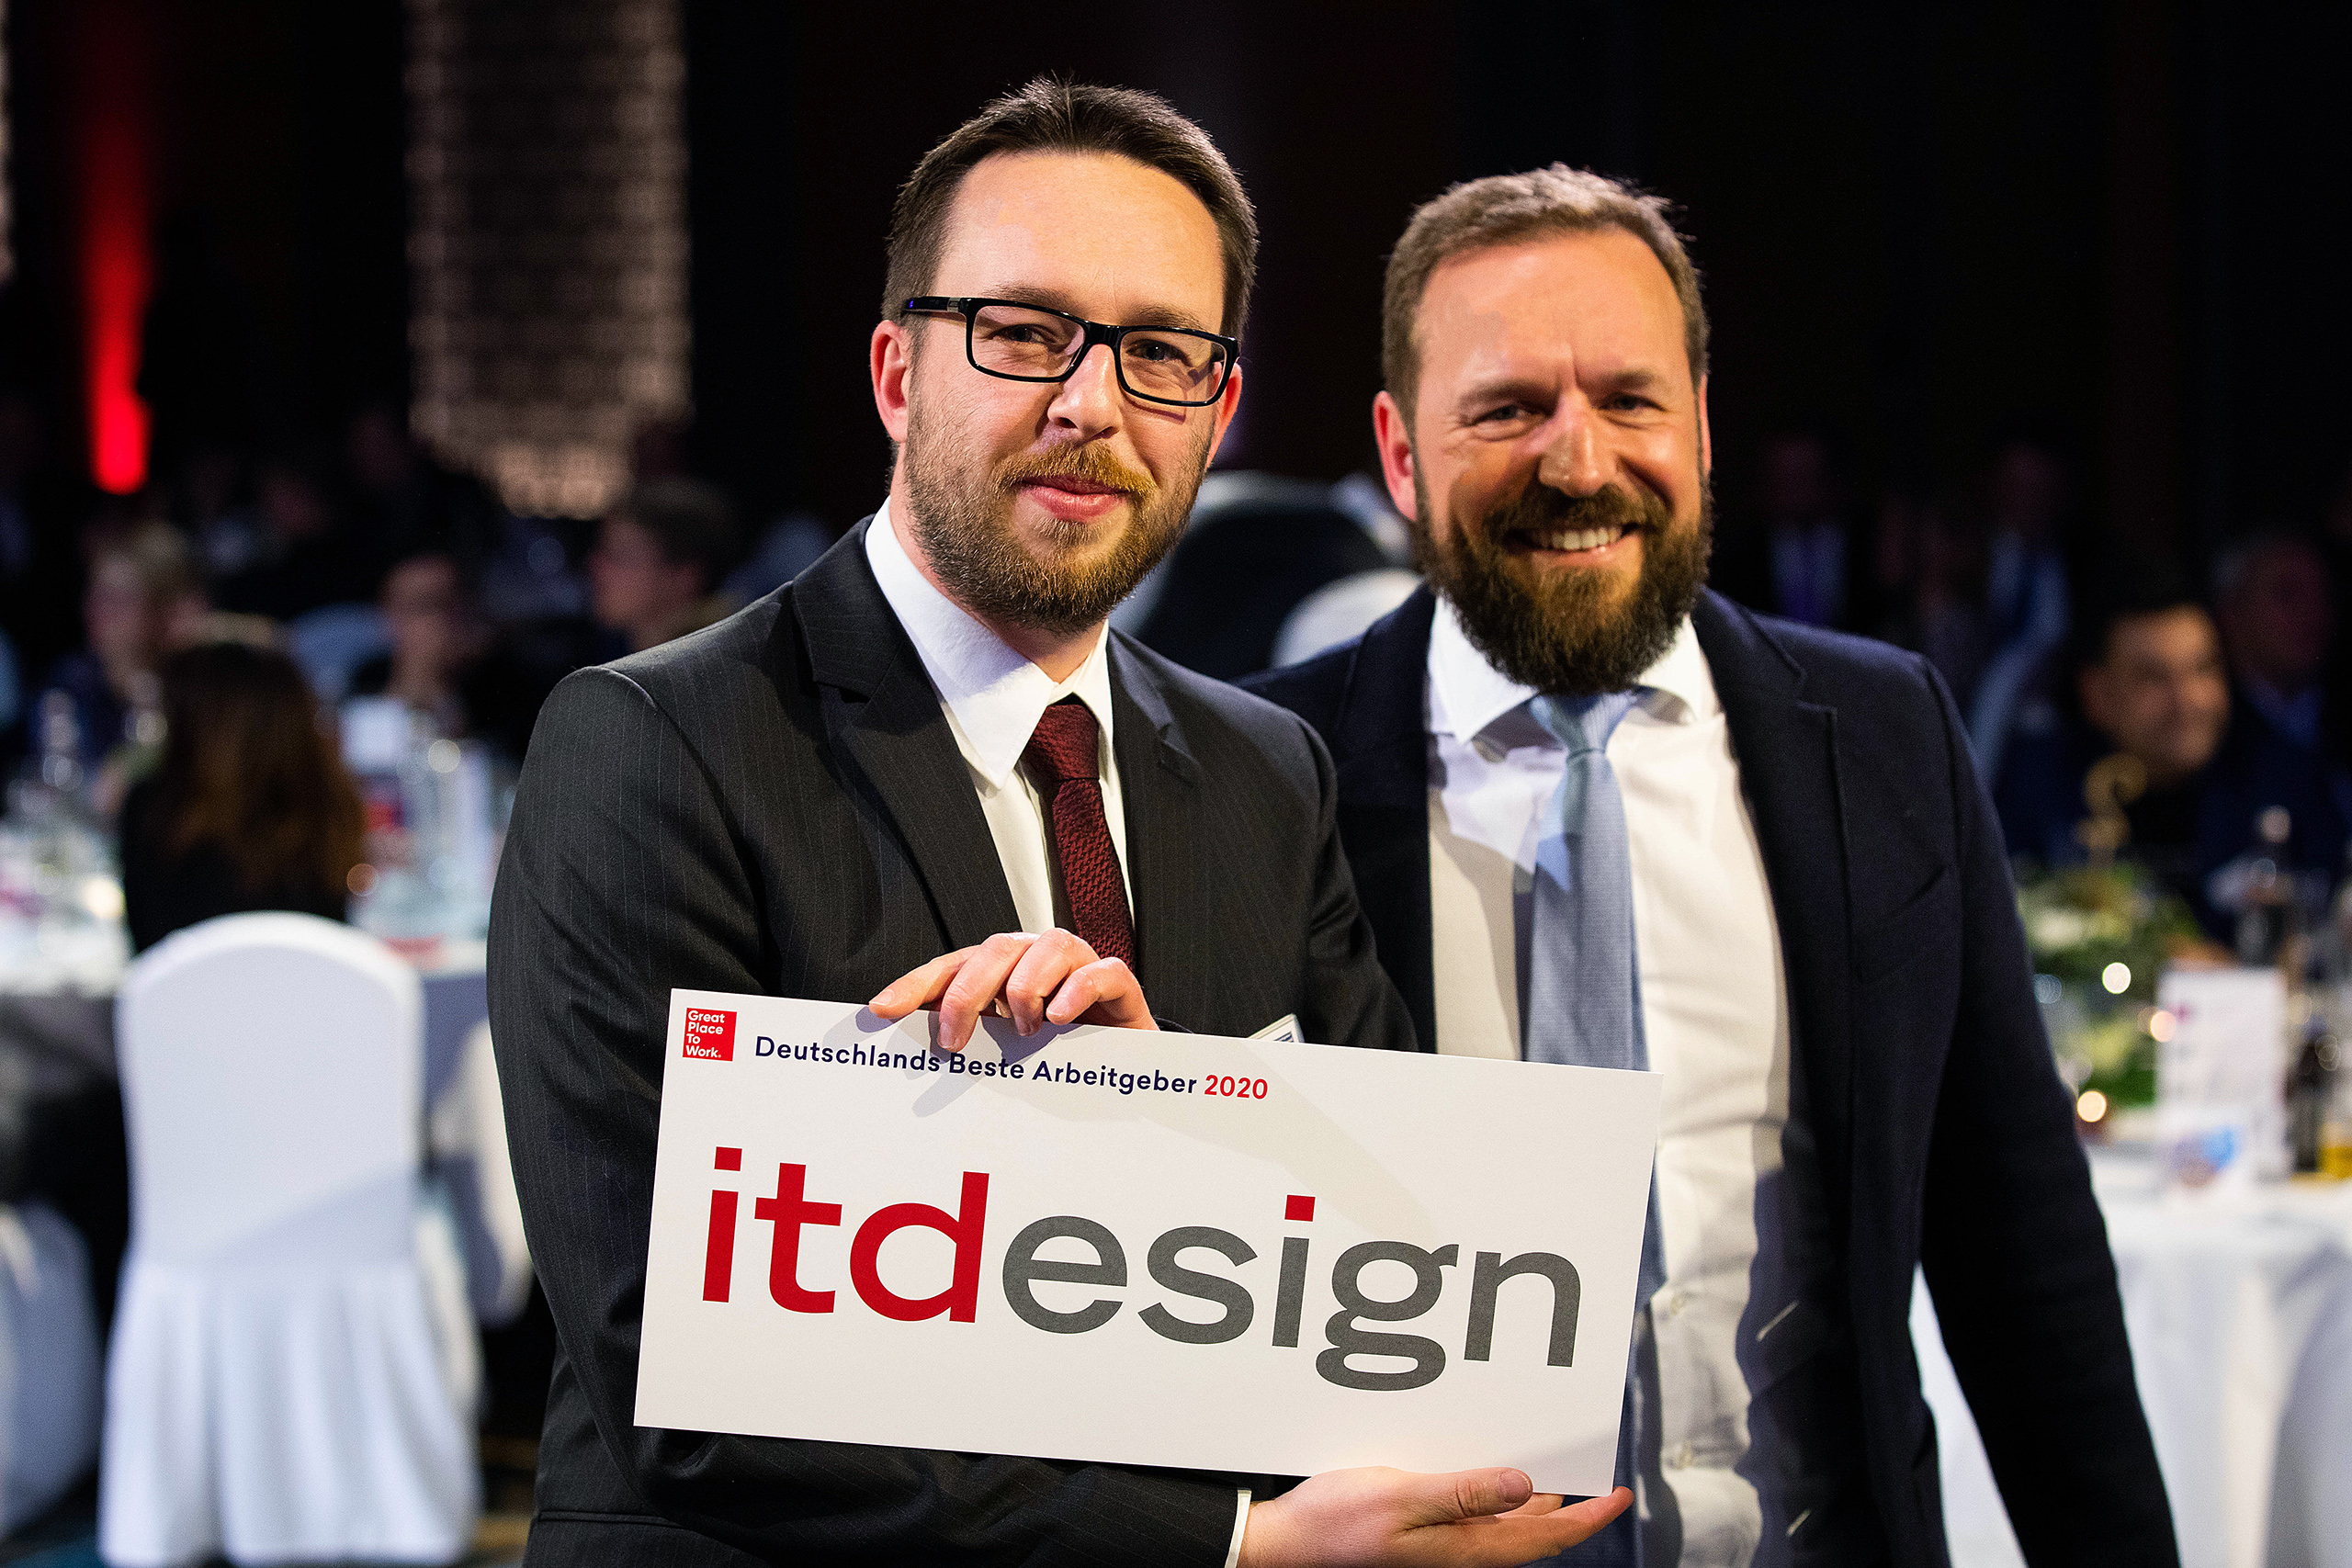 itdesign received the Great Place to Work award.